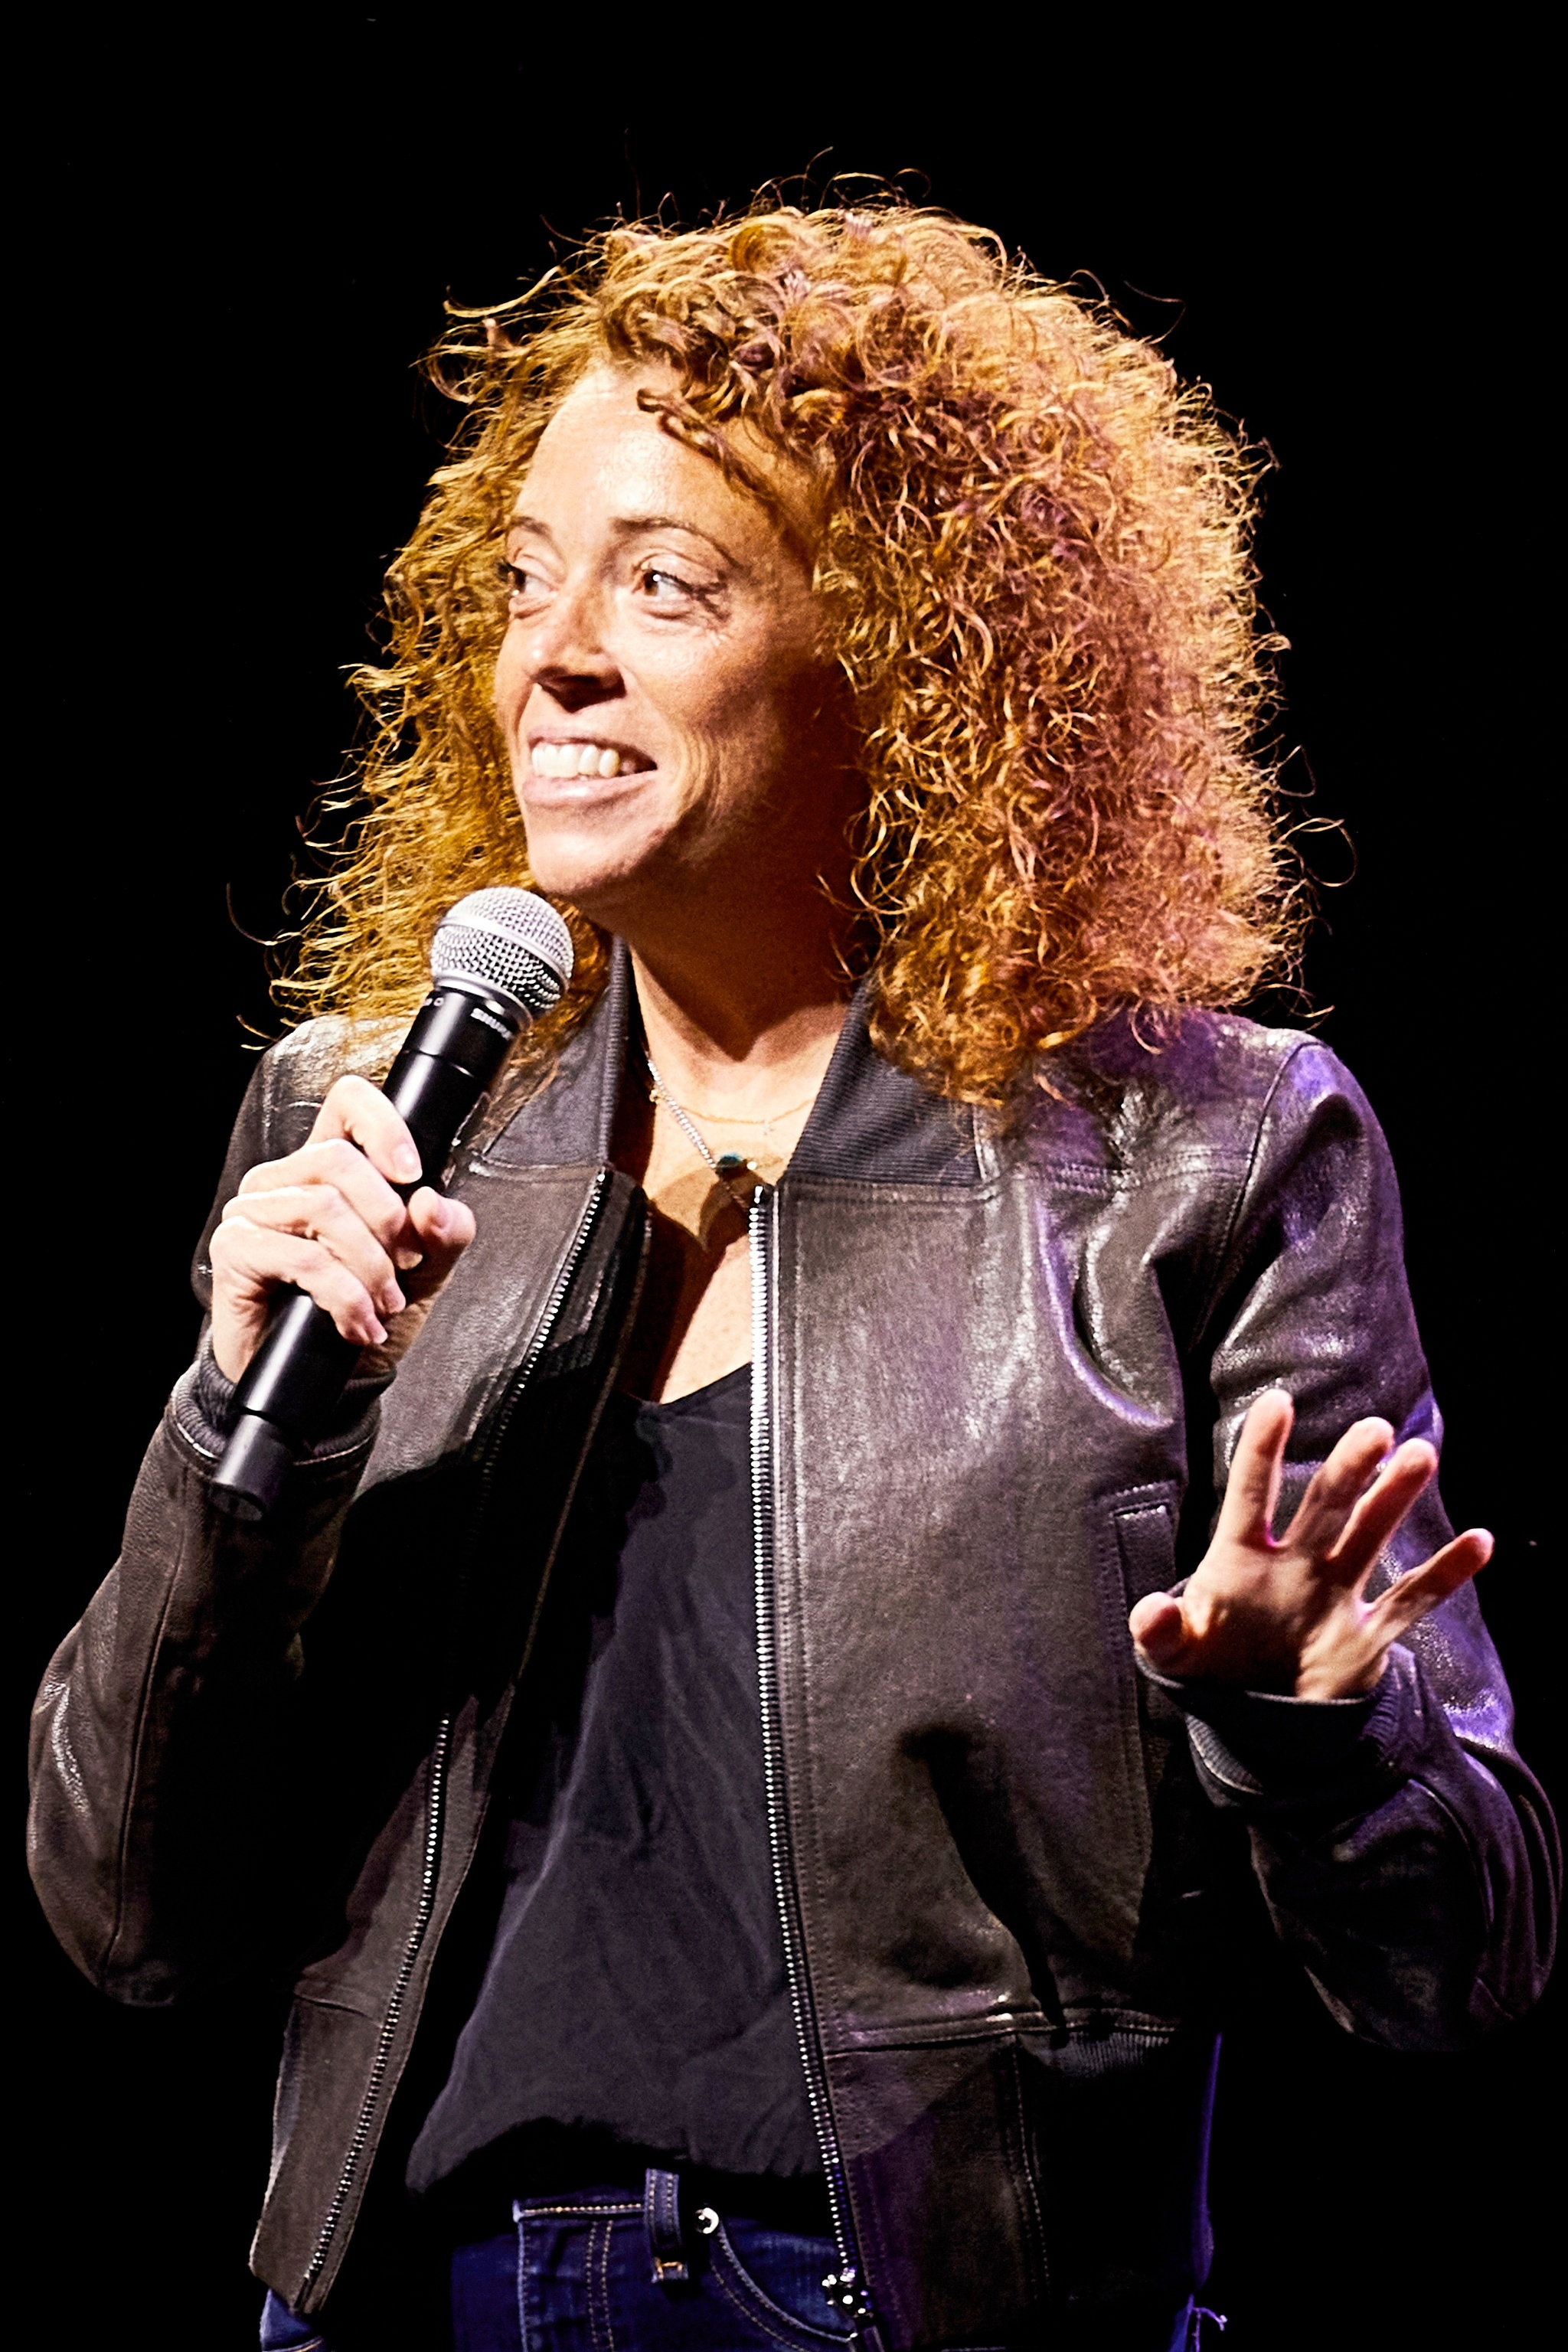 A close-up photo of comedian Michelle Wolf performing on stage. She has red curly hair, wears a leather bomber jacket, and holds a mic below her mouth. 